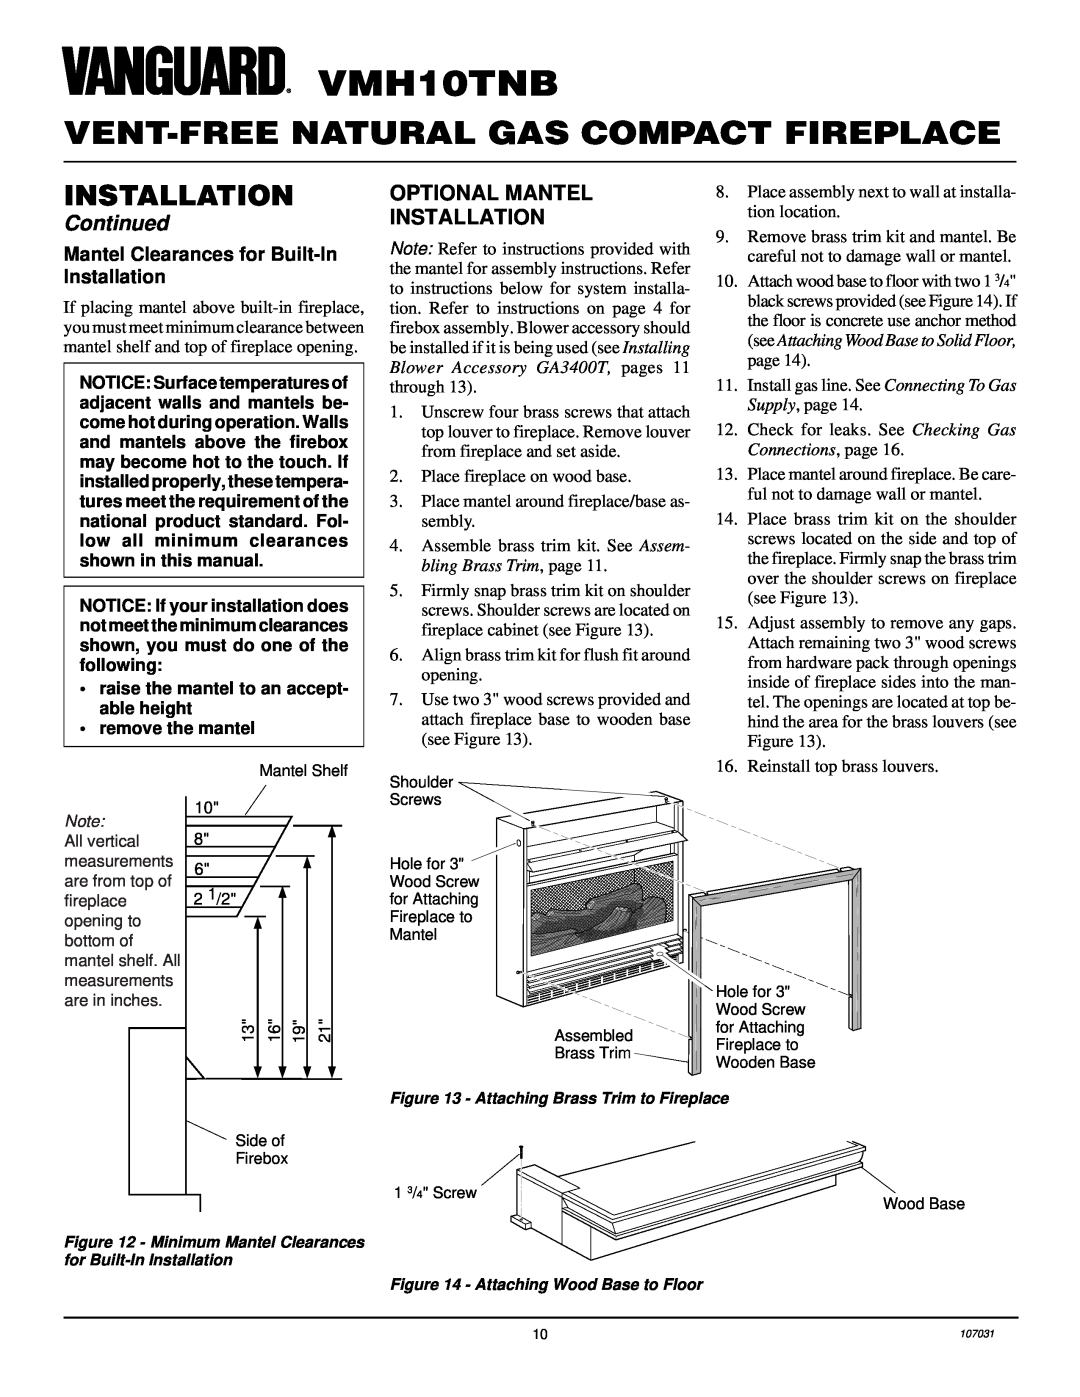 Vanguard Heating VMH10TNB installation manual Vent-Freenatural Gas Compact Fireplace, Installation, Continued 